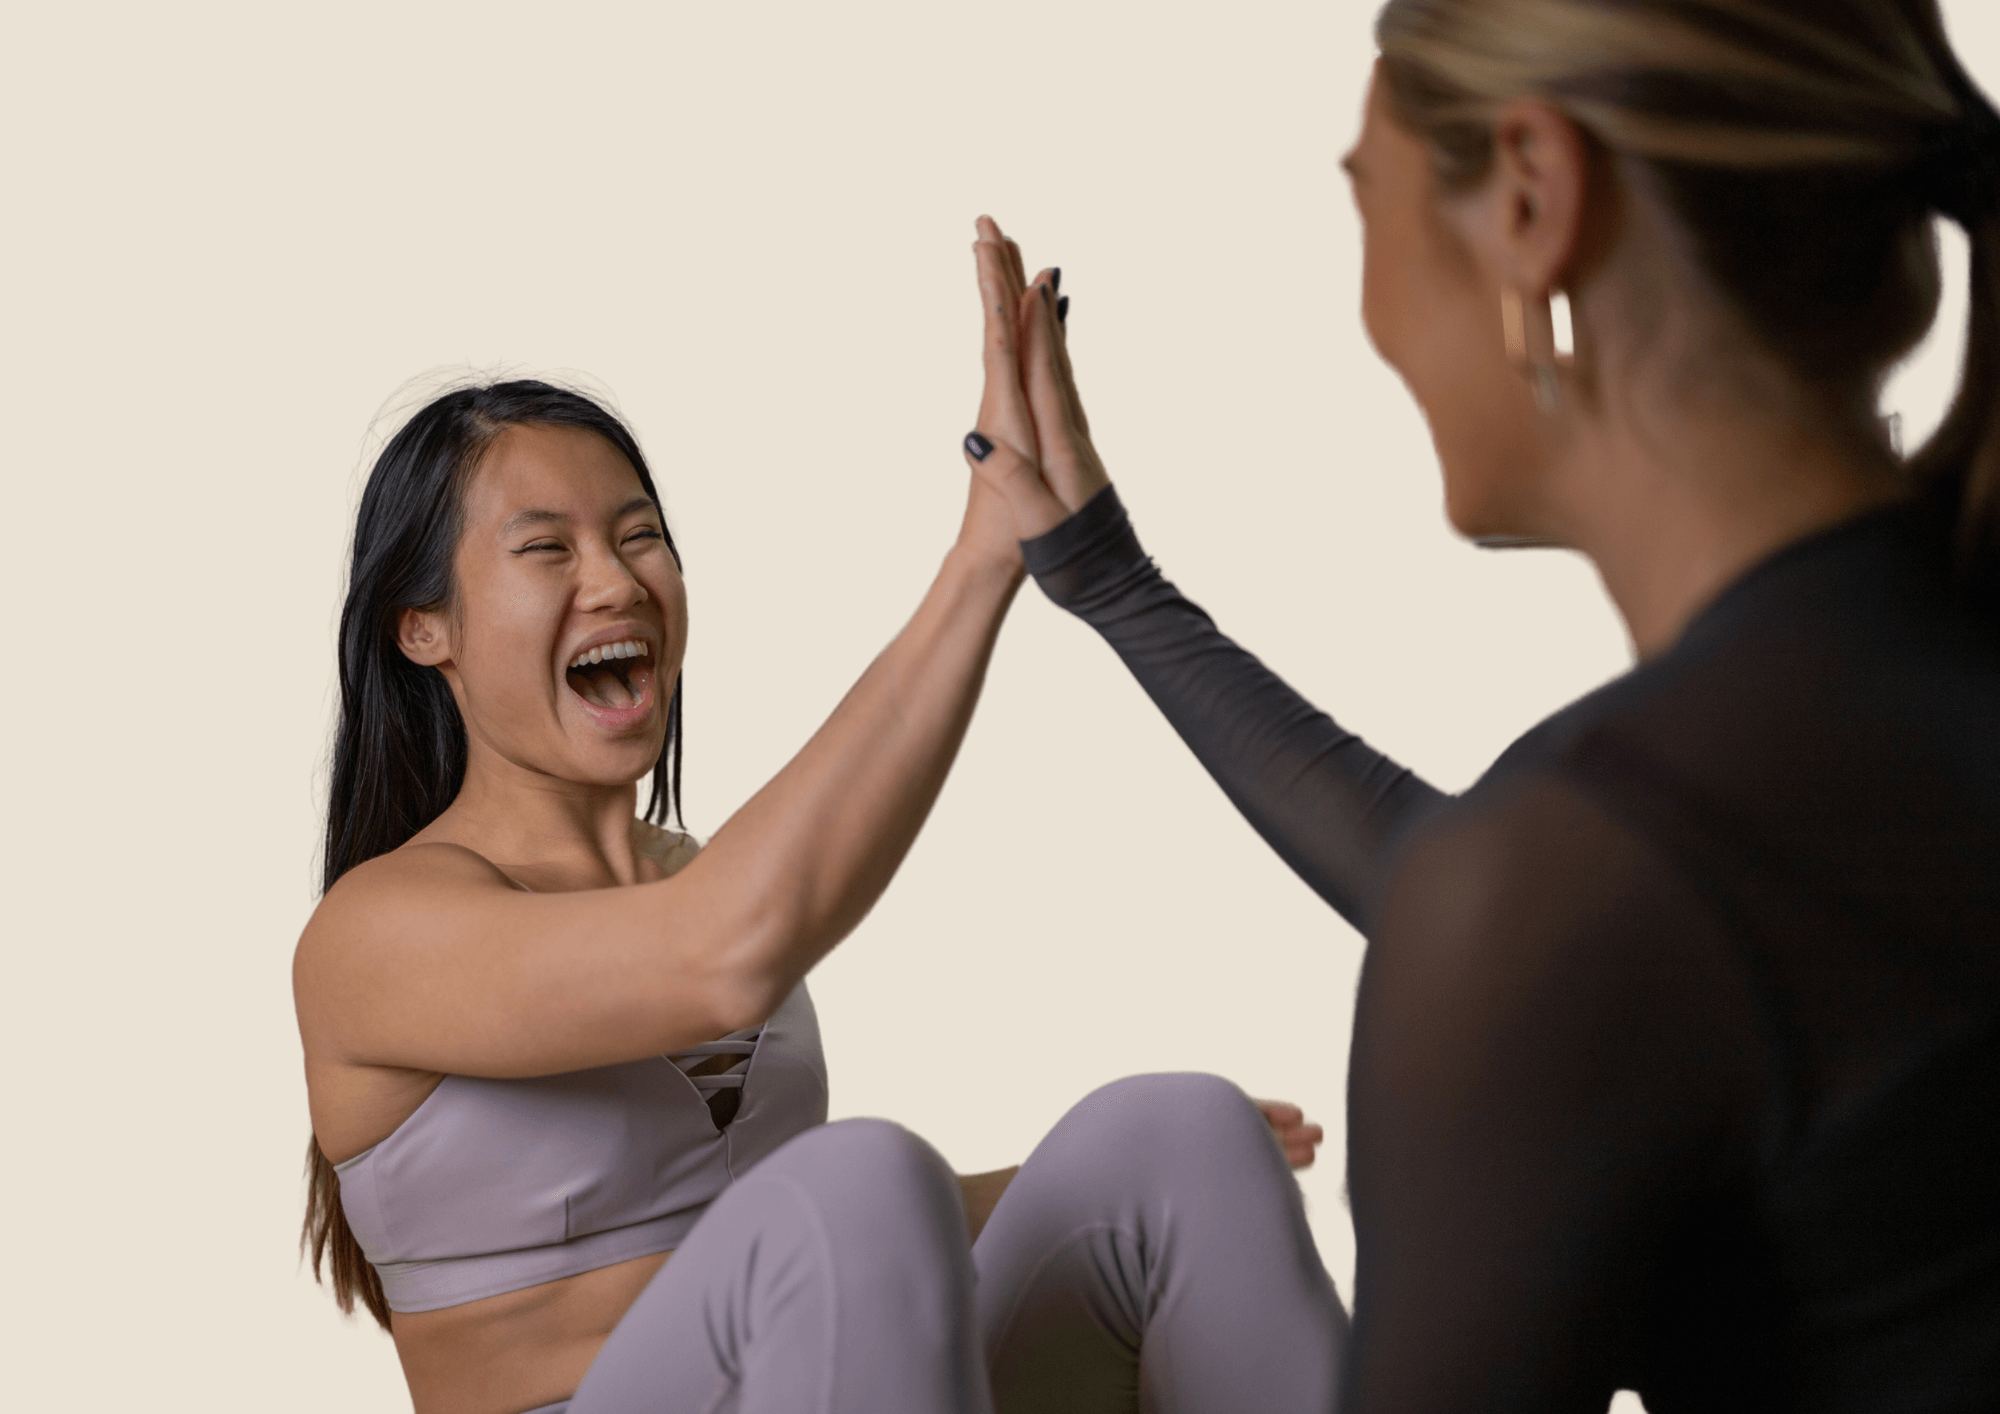 Patient and therapist high five after successful workout.